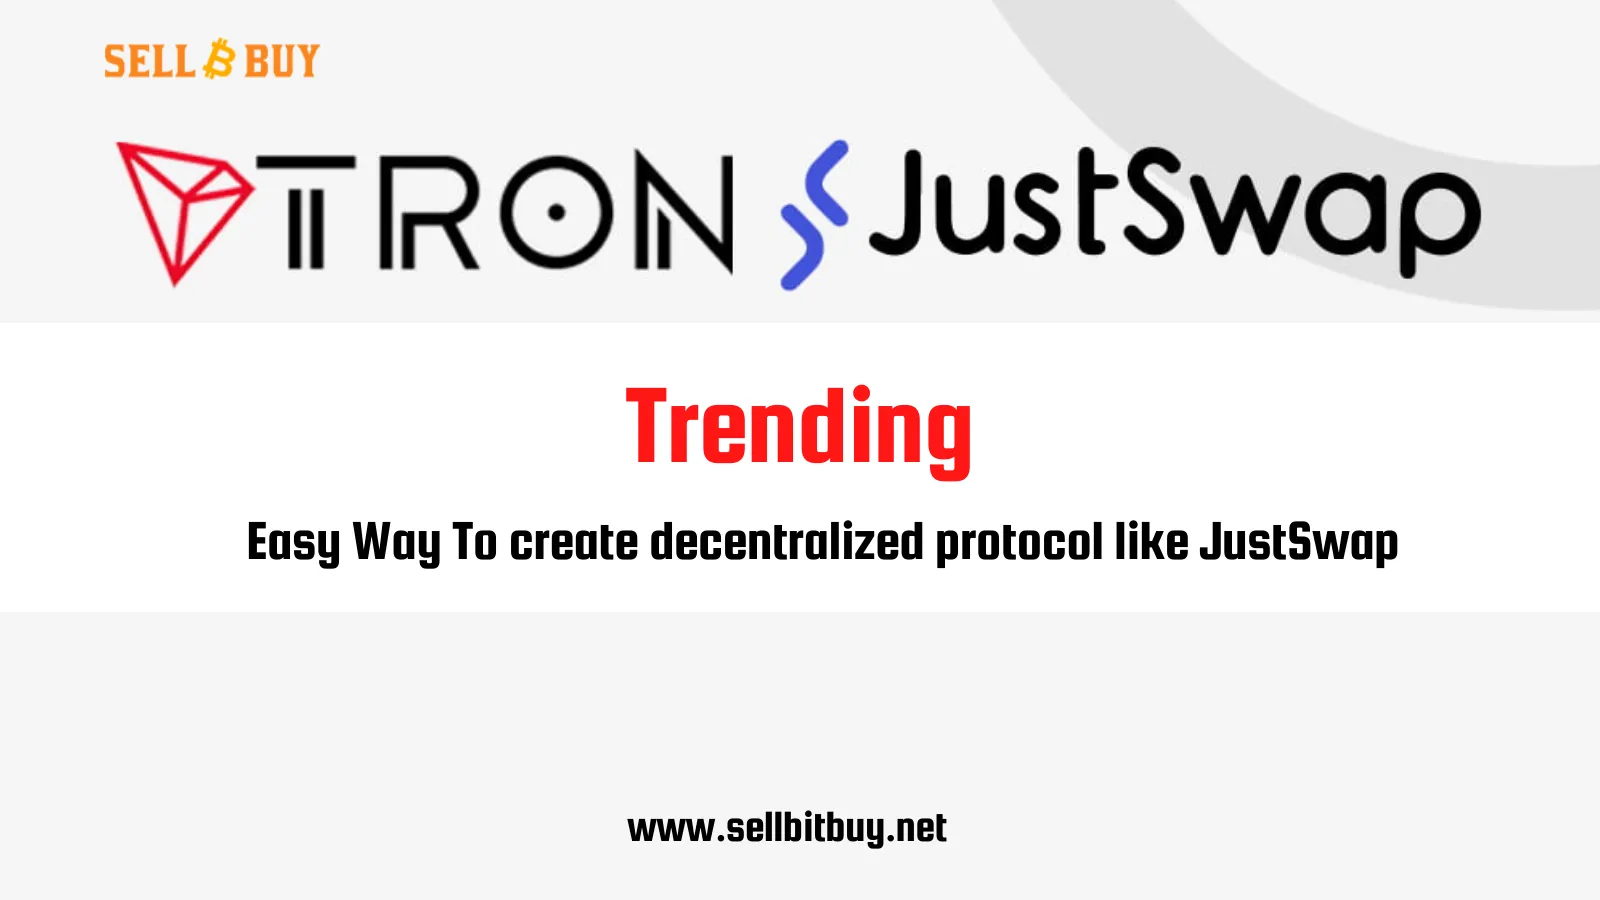 Spiking demand To Start A JustSwap Like Decentralized Exchange On TRON network